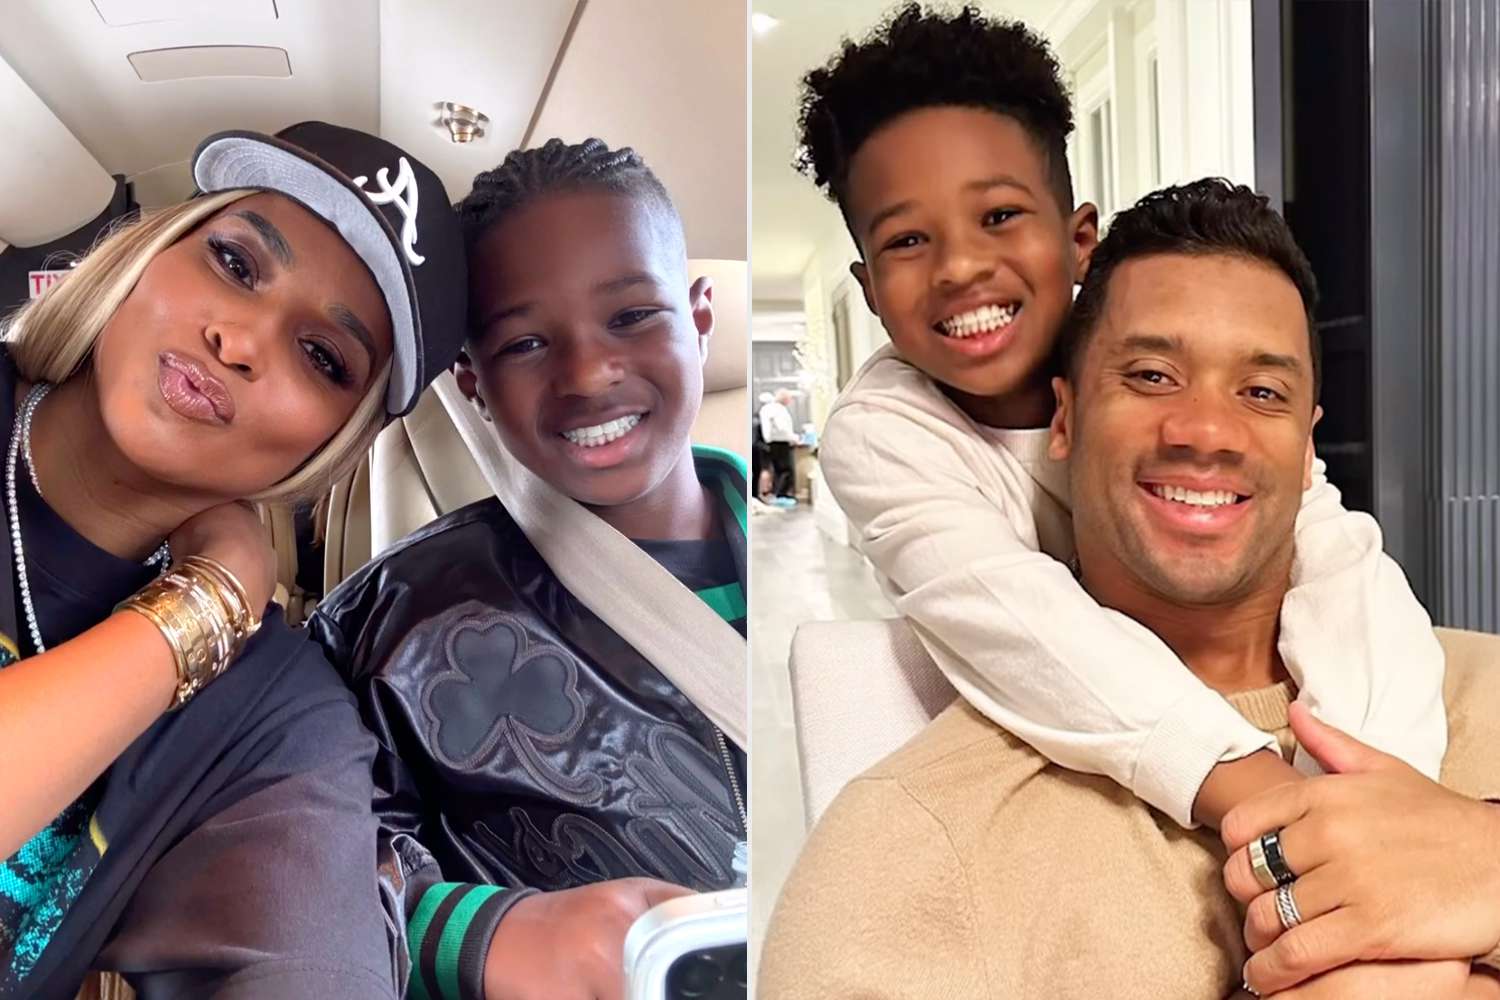 Ciara and Russell Wilson Celebrate Son Future’s 10th Birthday: 'Our Biggest Blessing'